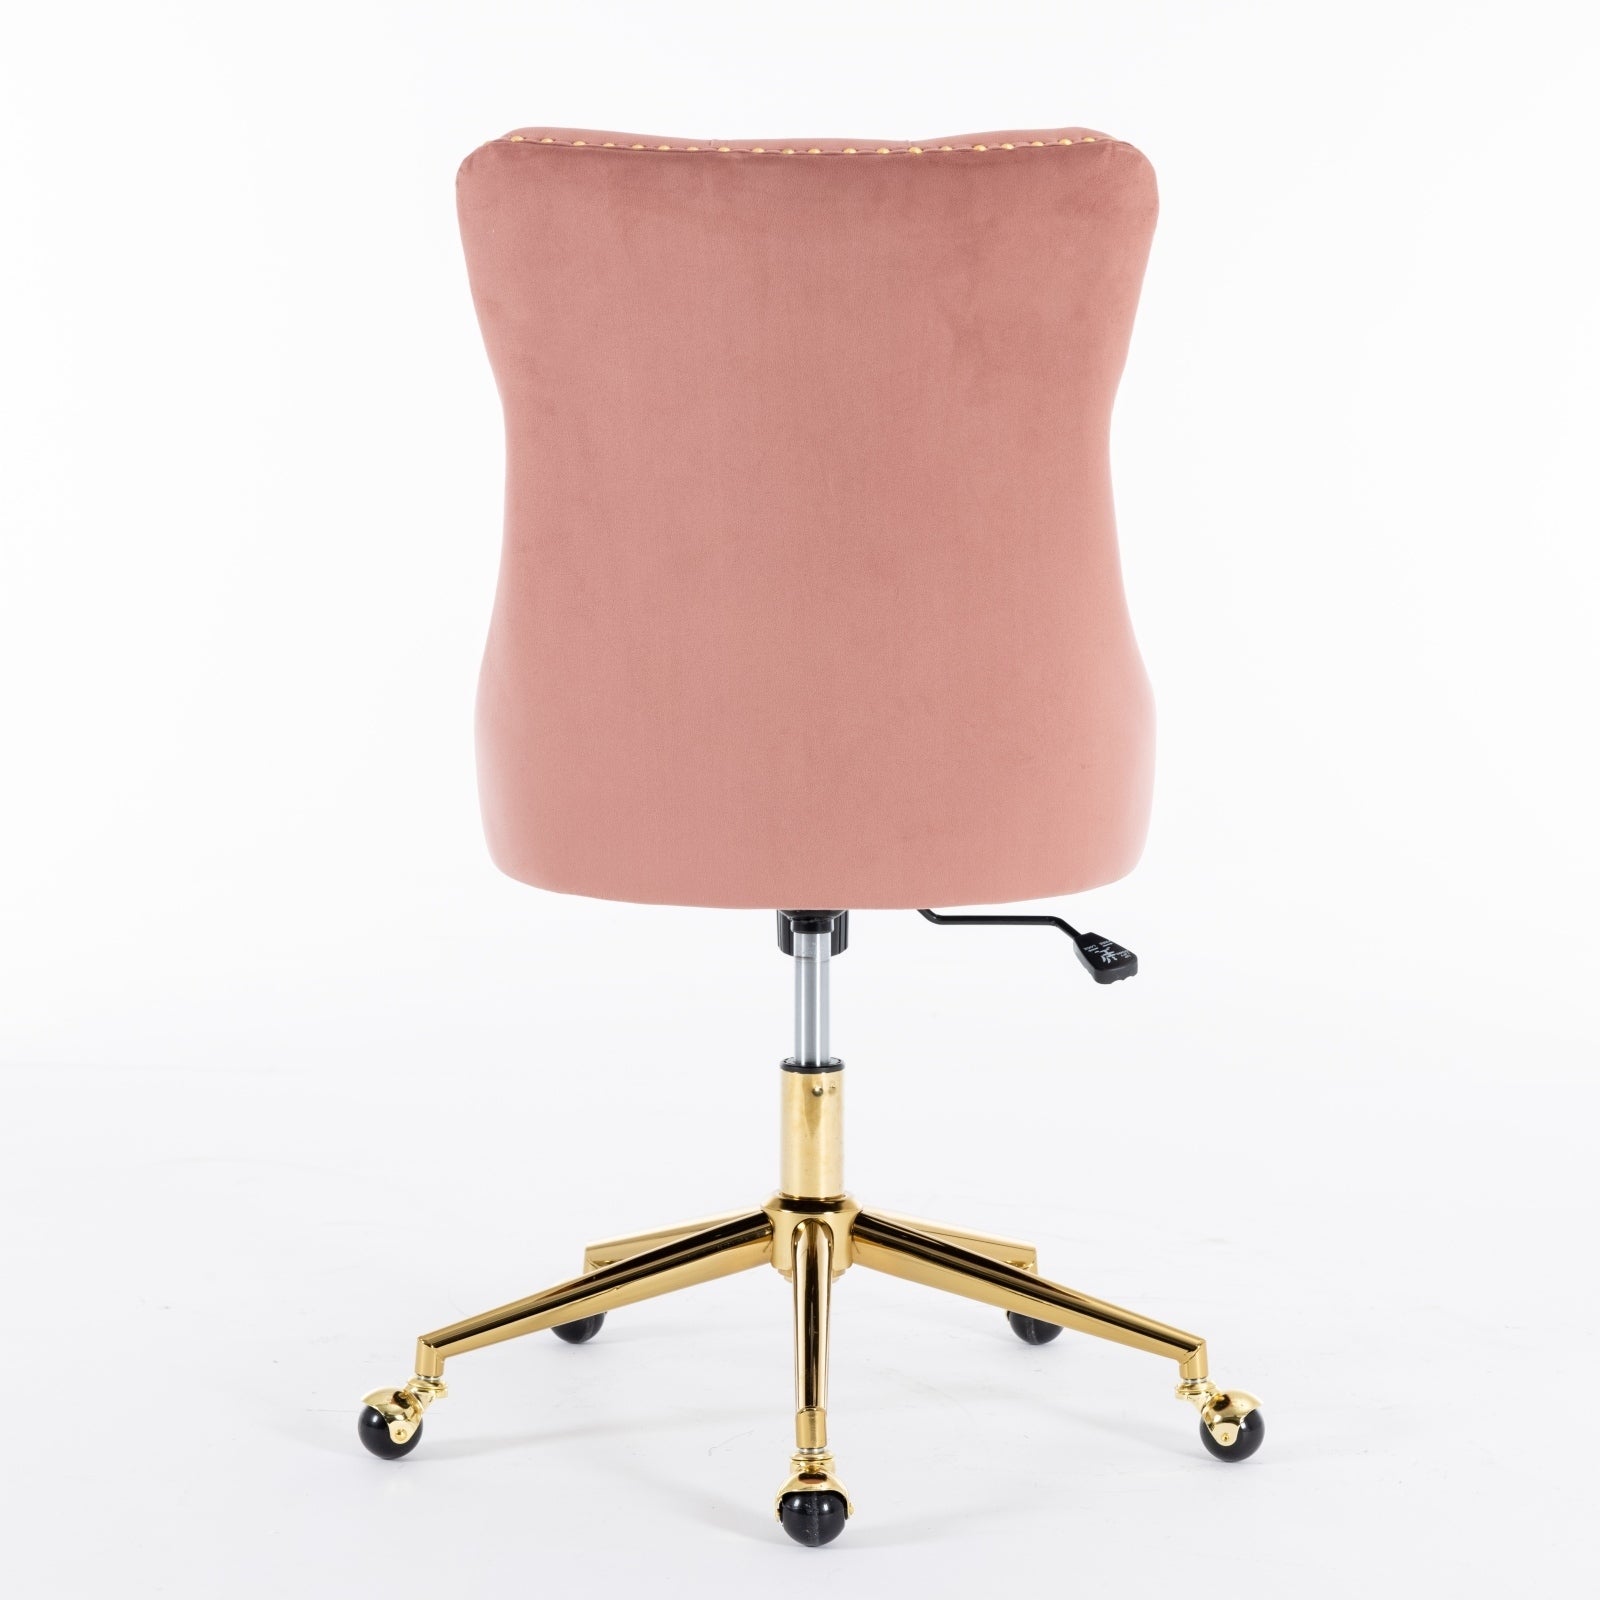 Velvet Upholstered Tufted Button Home Office Chair with Golden Metal Base, Adjustable Desk Chair Swivel Office Chair - Pink